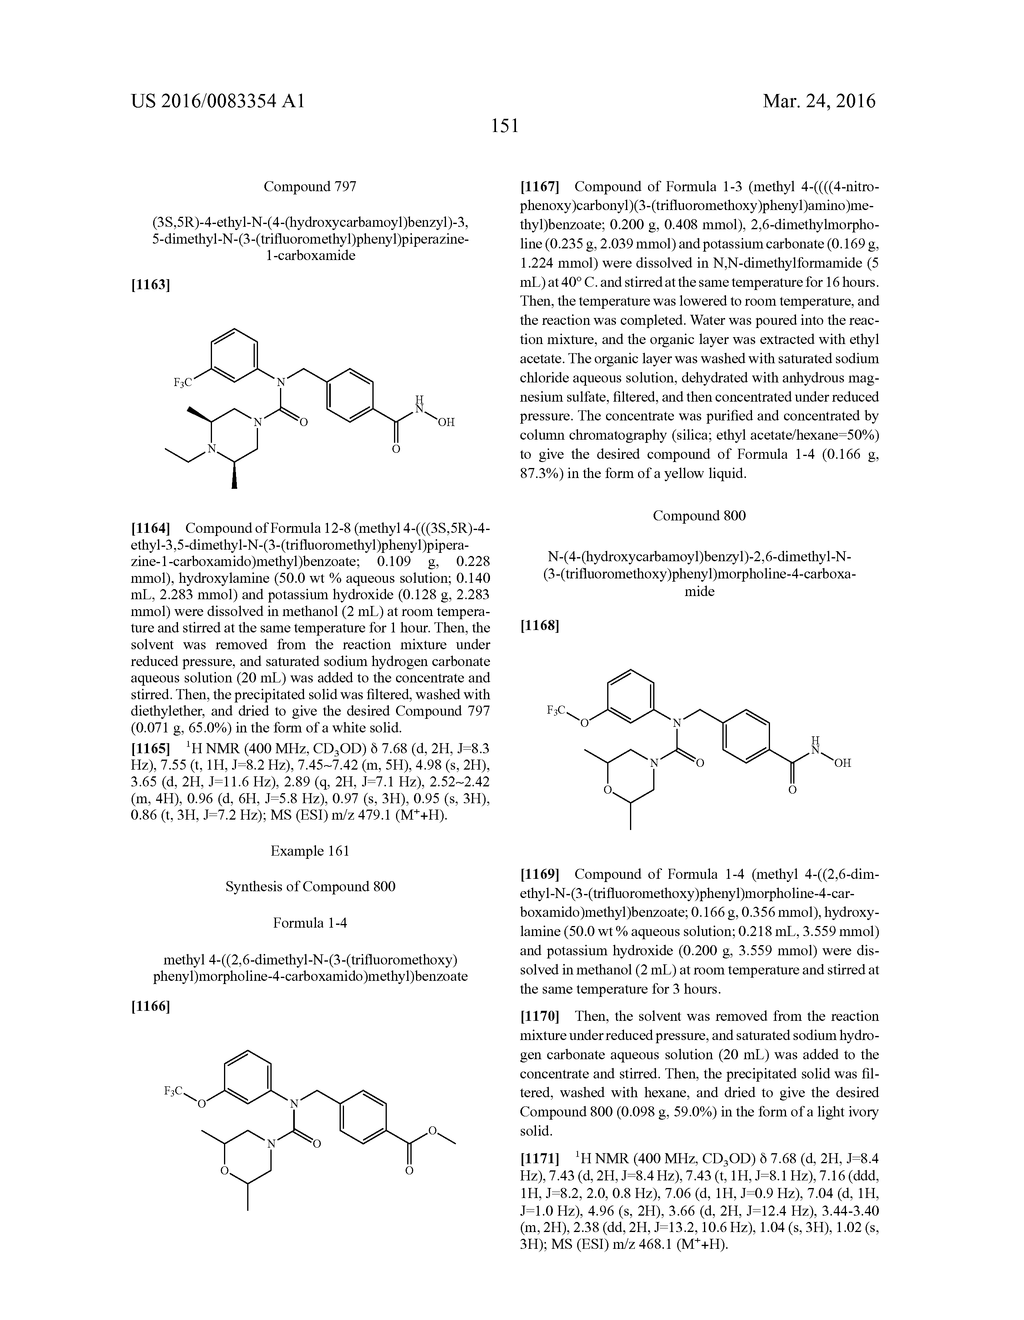 NOVEL COMPOUNDS FOR SELECTIVE HISTONE DEACETYLASE INHIBITORS, AND     PHARMACEUTICAL COMPOSITION COMPRISING THE SAME - diagram, schematic, and image 156